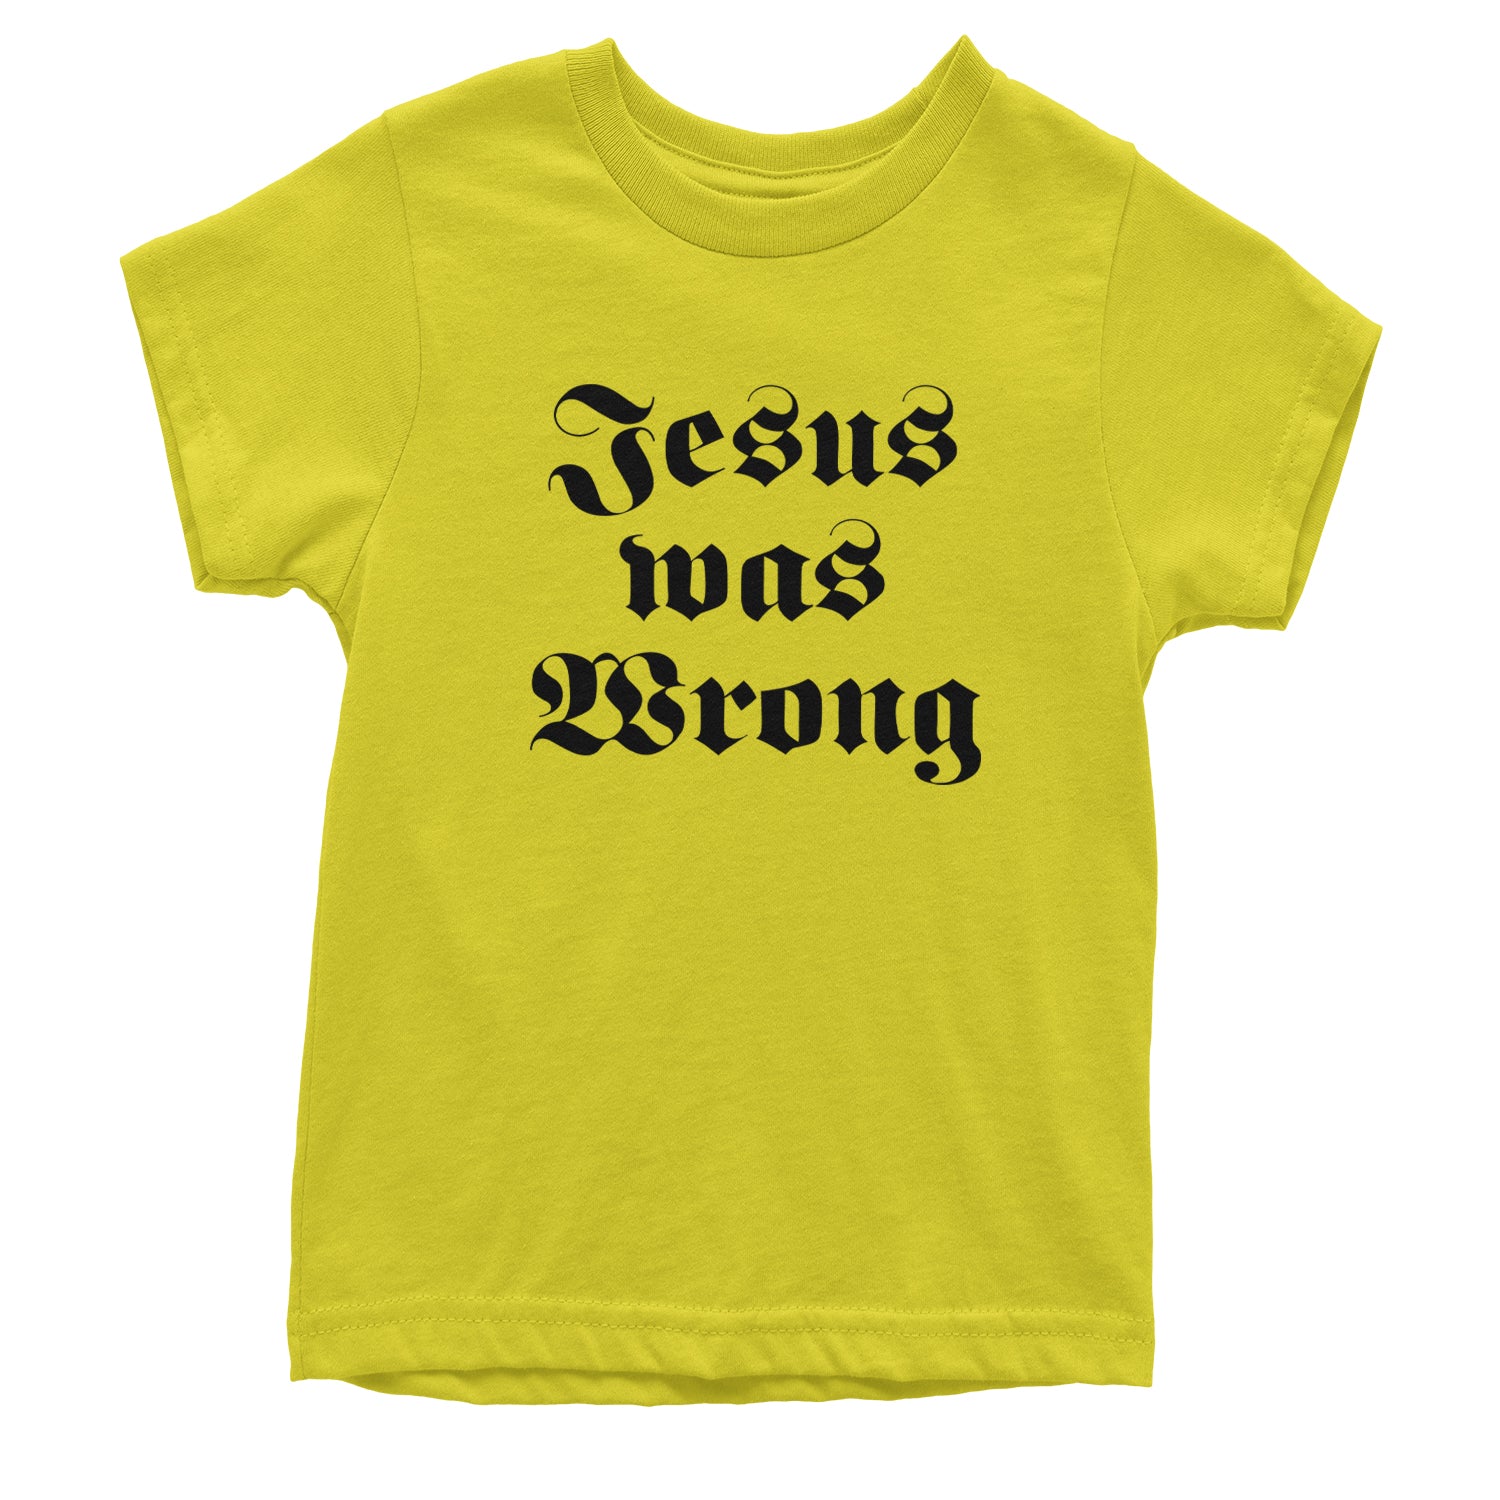 Jesus Was Wrong Little Miss Sunshine Youth T-shirt breslin, dano, movie, paul, shine, shirt, sun by Expression Tees